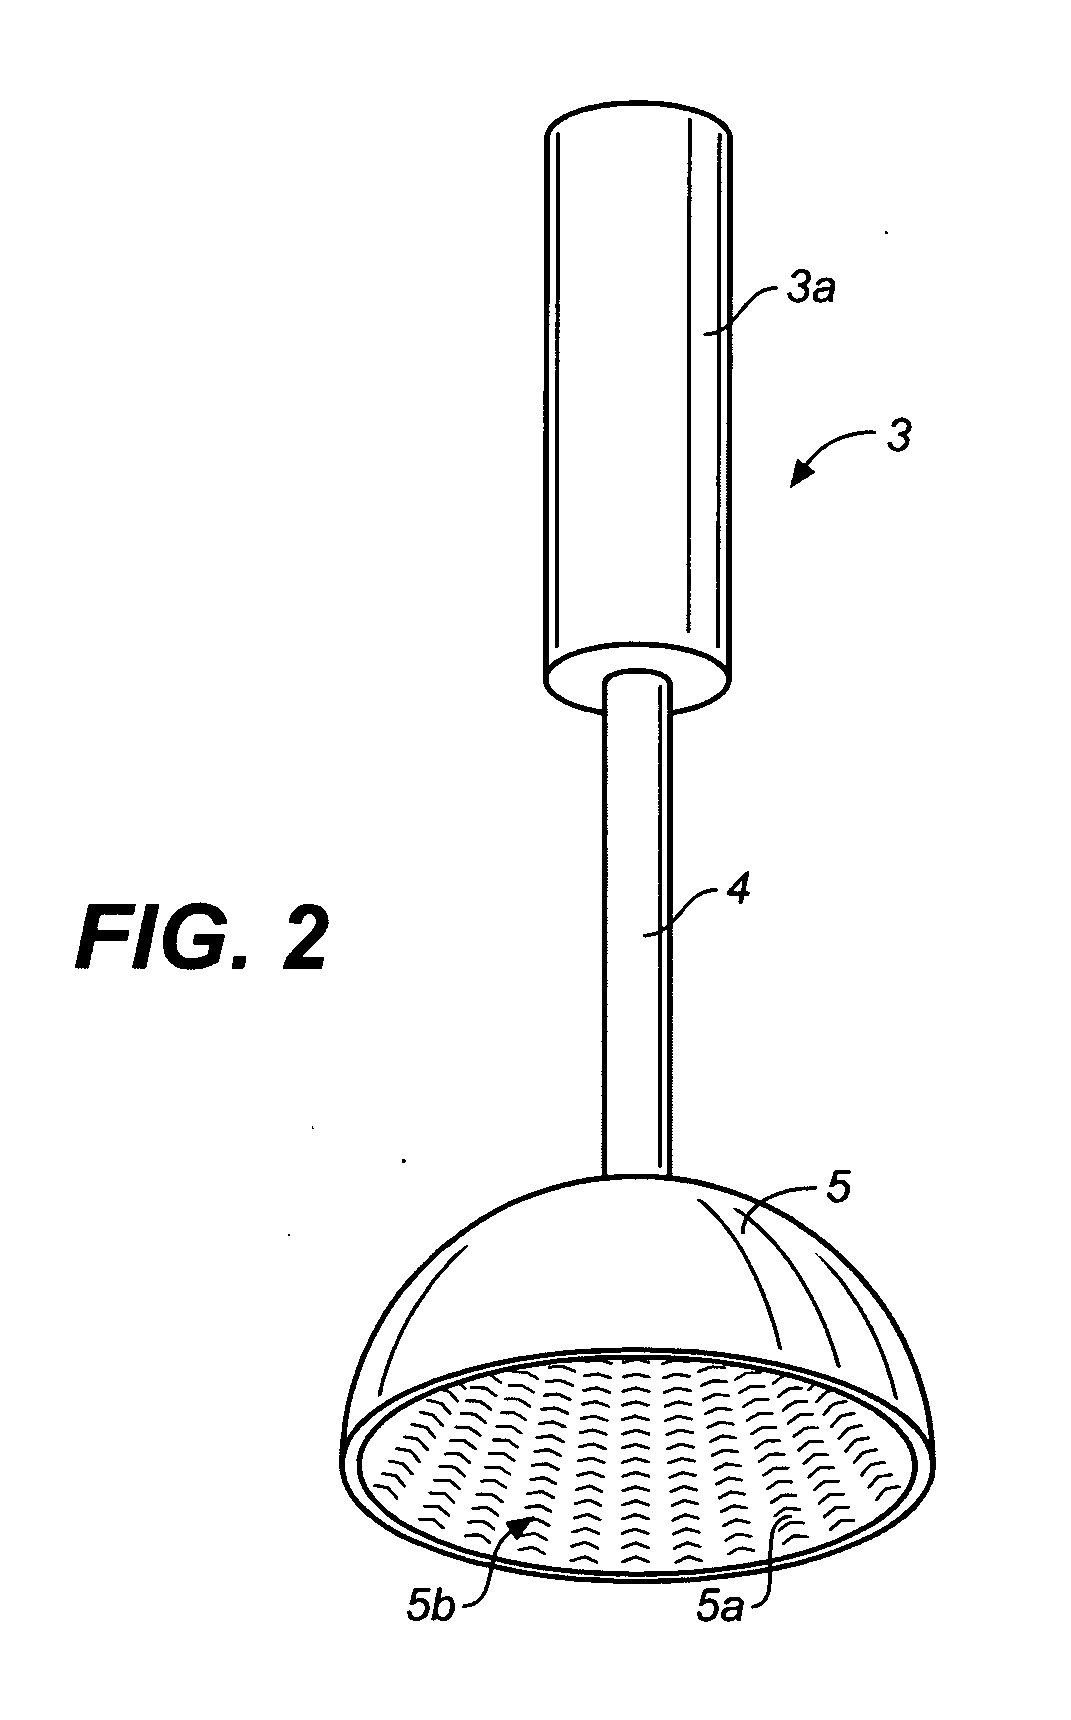 Device and method for allograft total hip arthroplasty